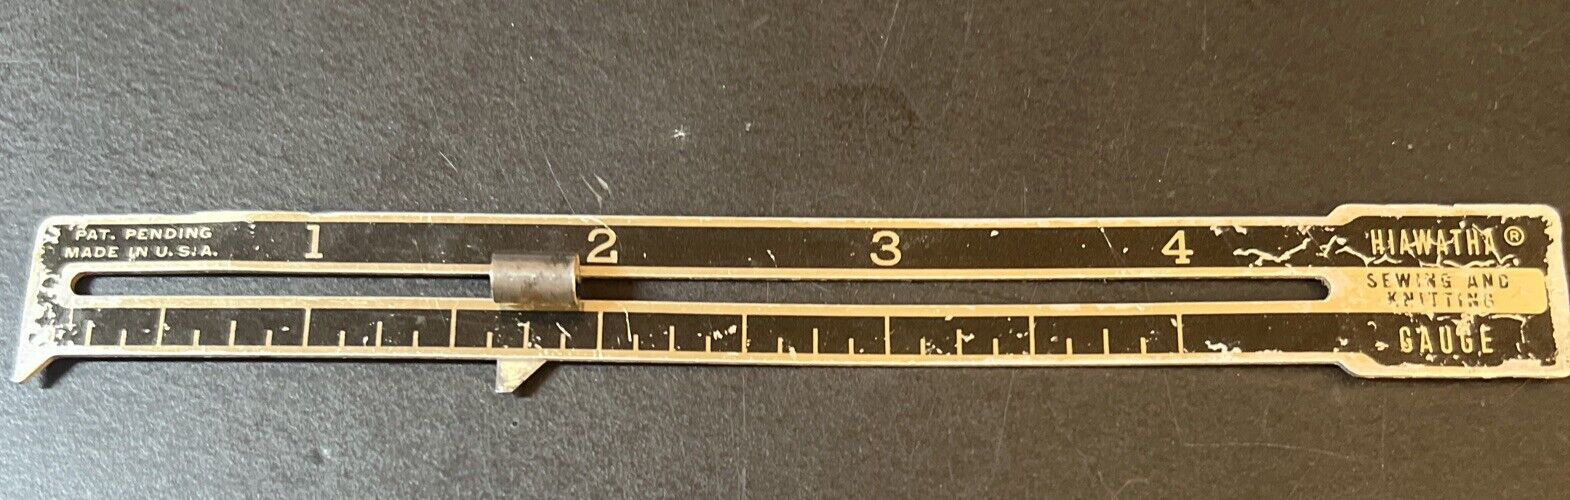 Vintage Hiawatha Sewing And Knitting Gauge Made In The USA